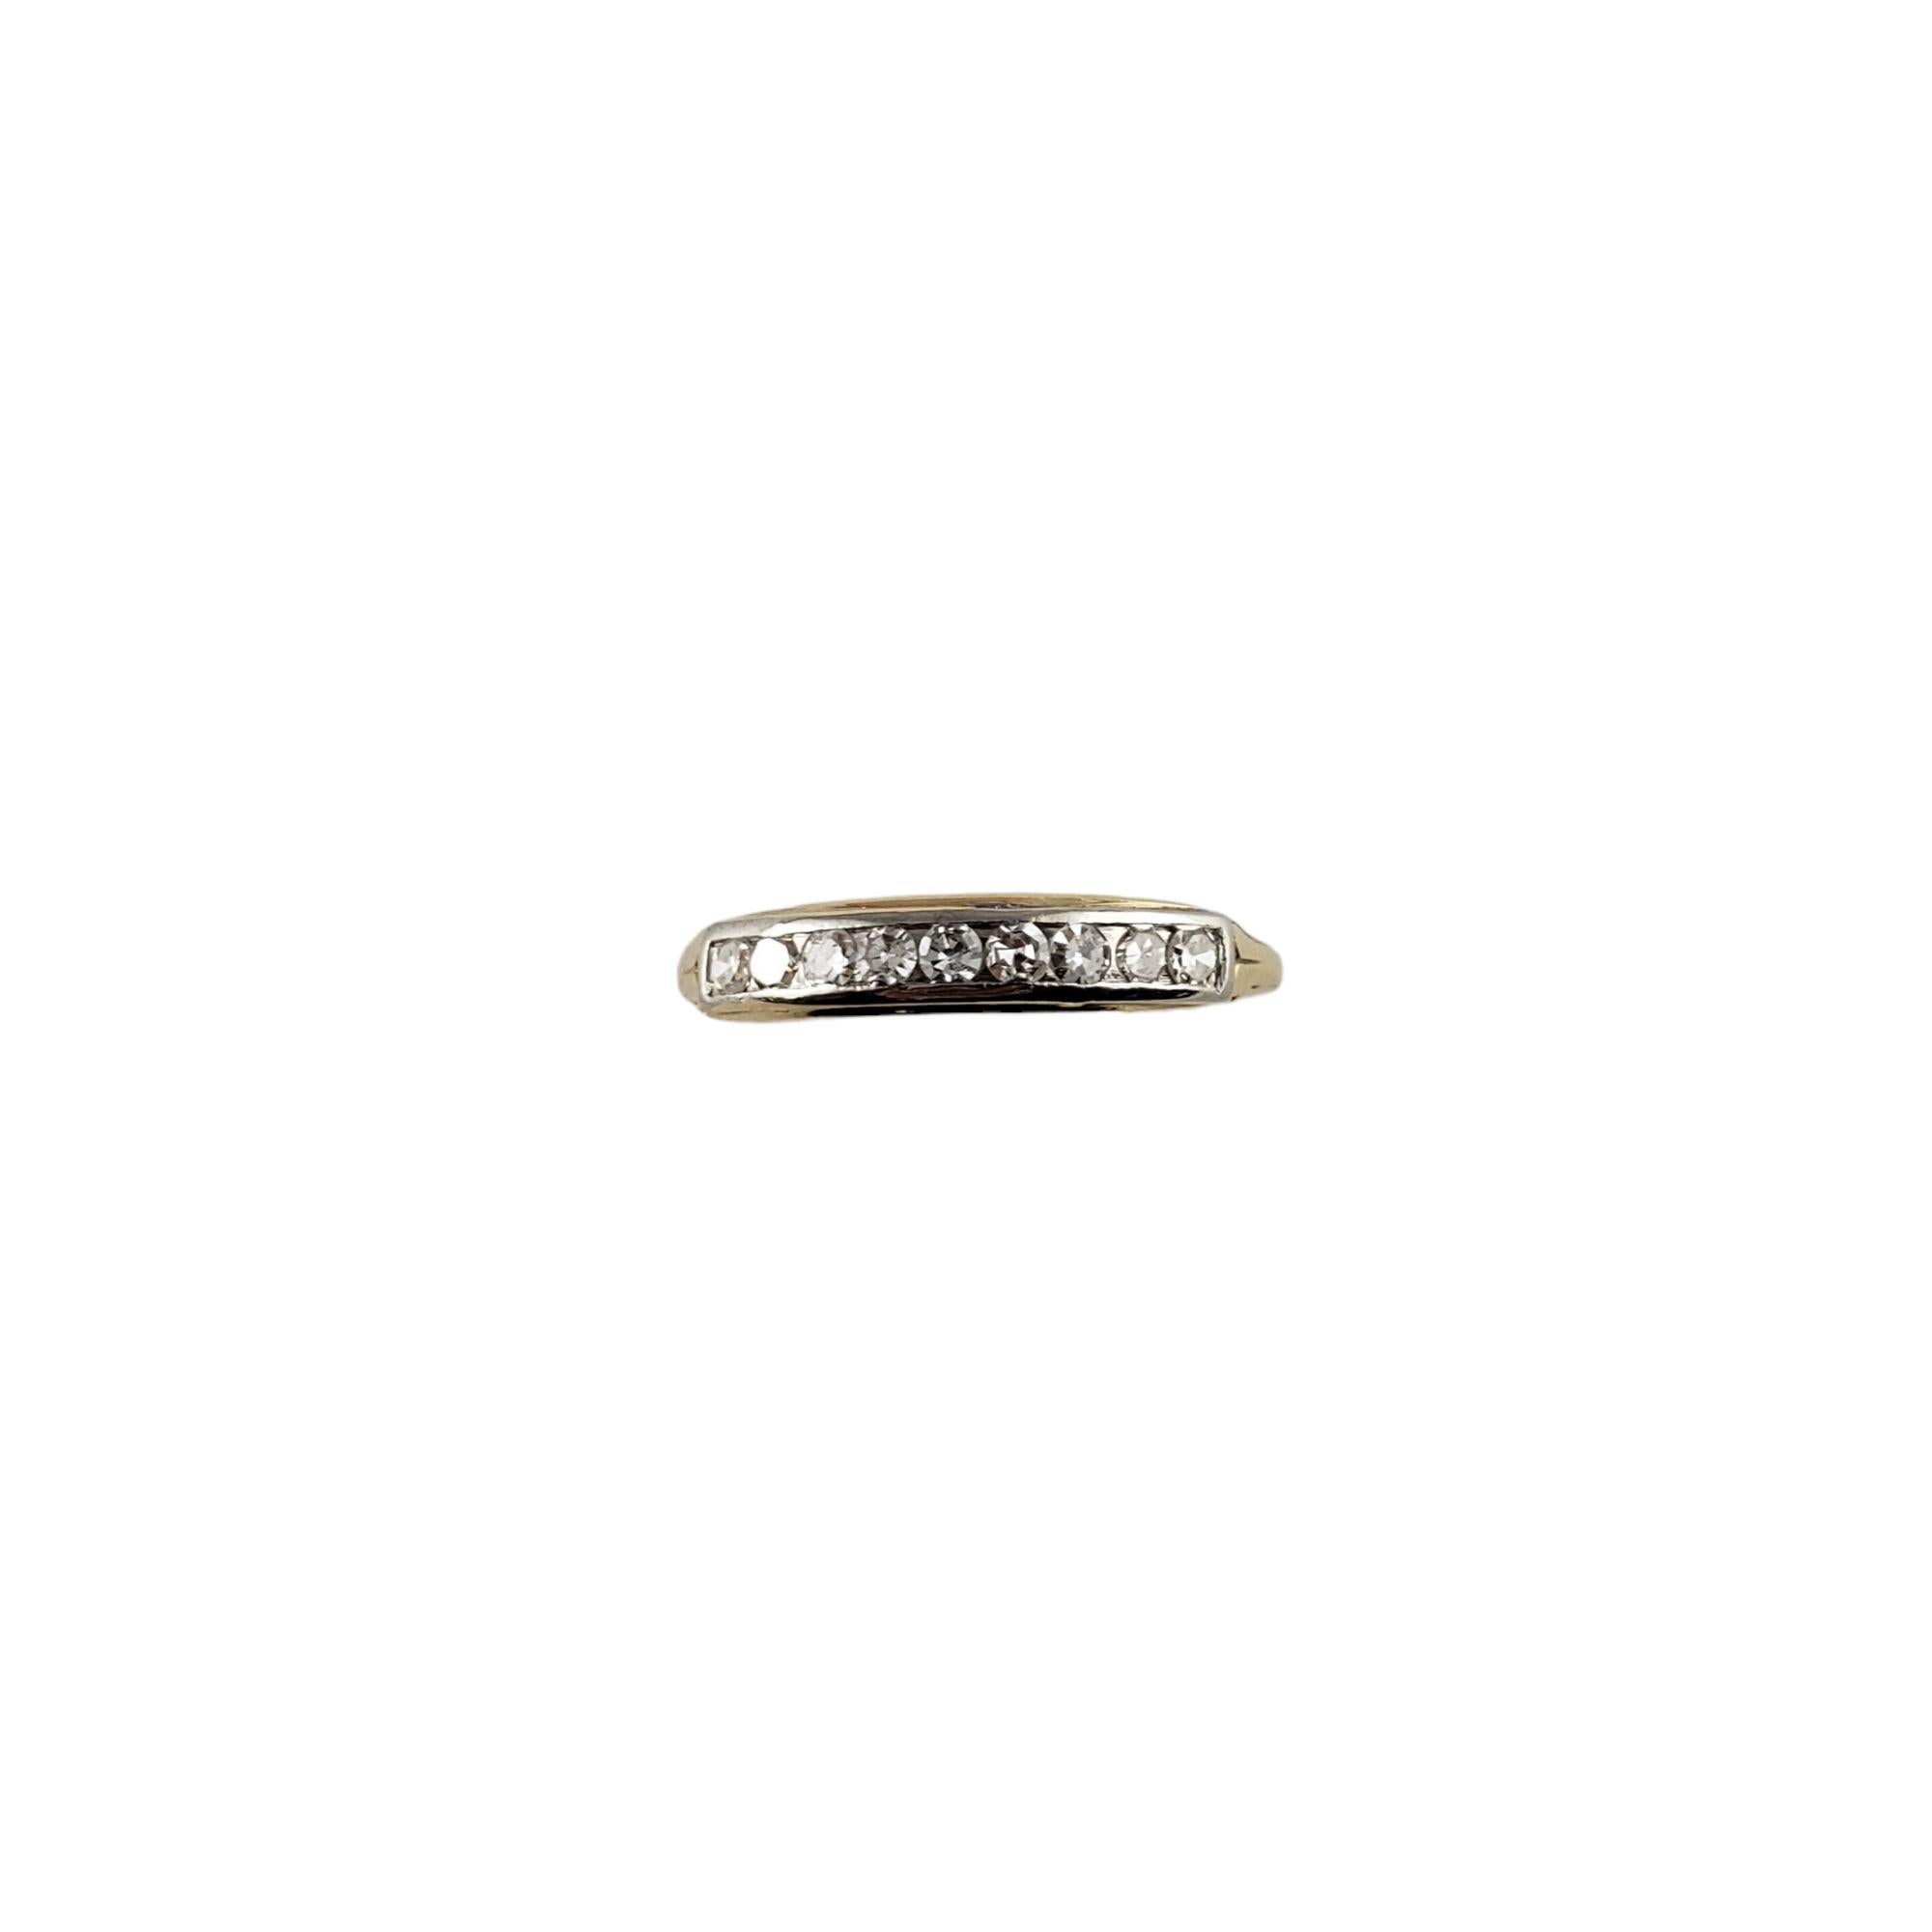 Vintage 14 Karat Yellow Gold and Diamond Wedding Band Ring Size 6.5-

This elegant band features nine round single cut diamonds set in classic 14K yellow gold. Width: 3 mm. Shank: 1 mm.

Approximate total diamond weight: .27 ct.

Diamond color: